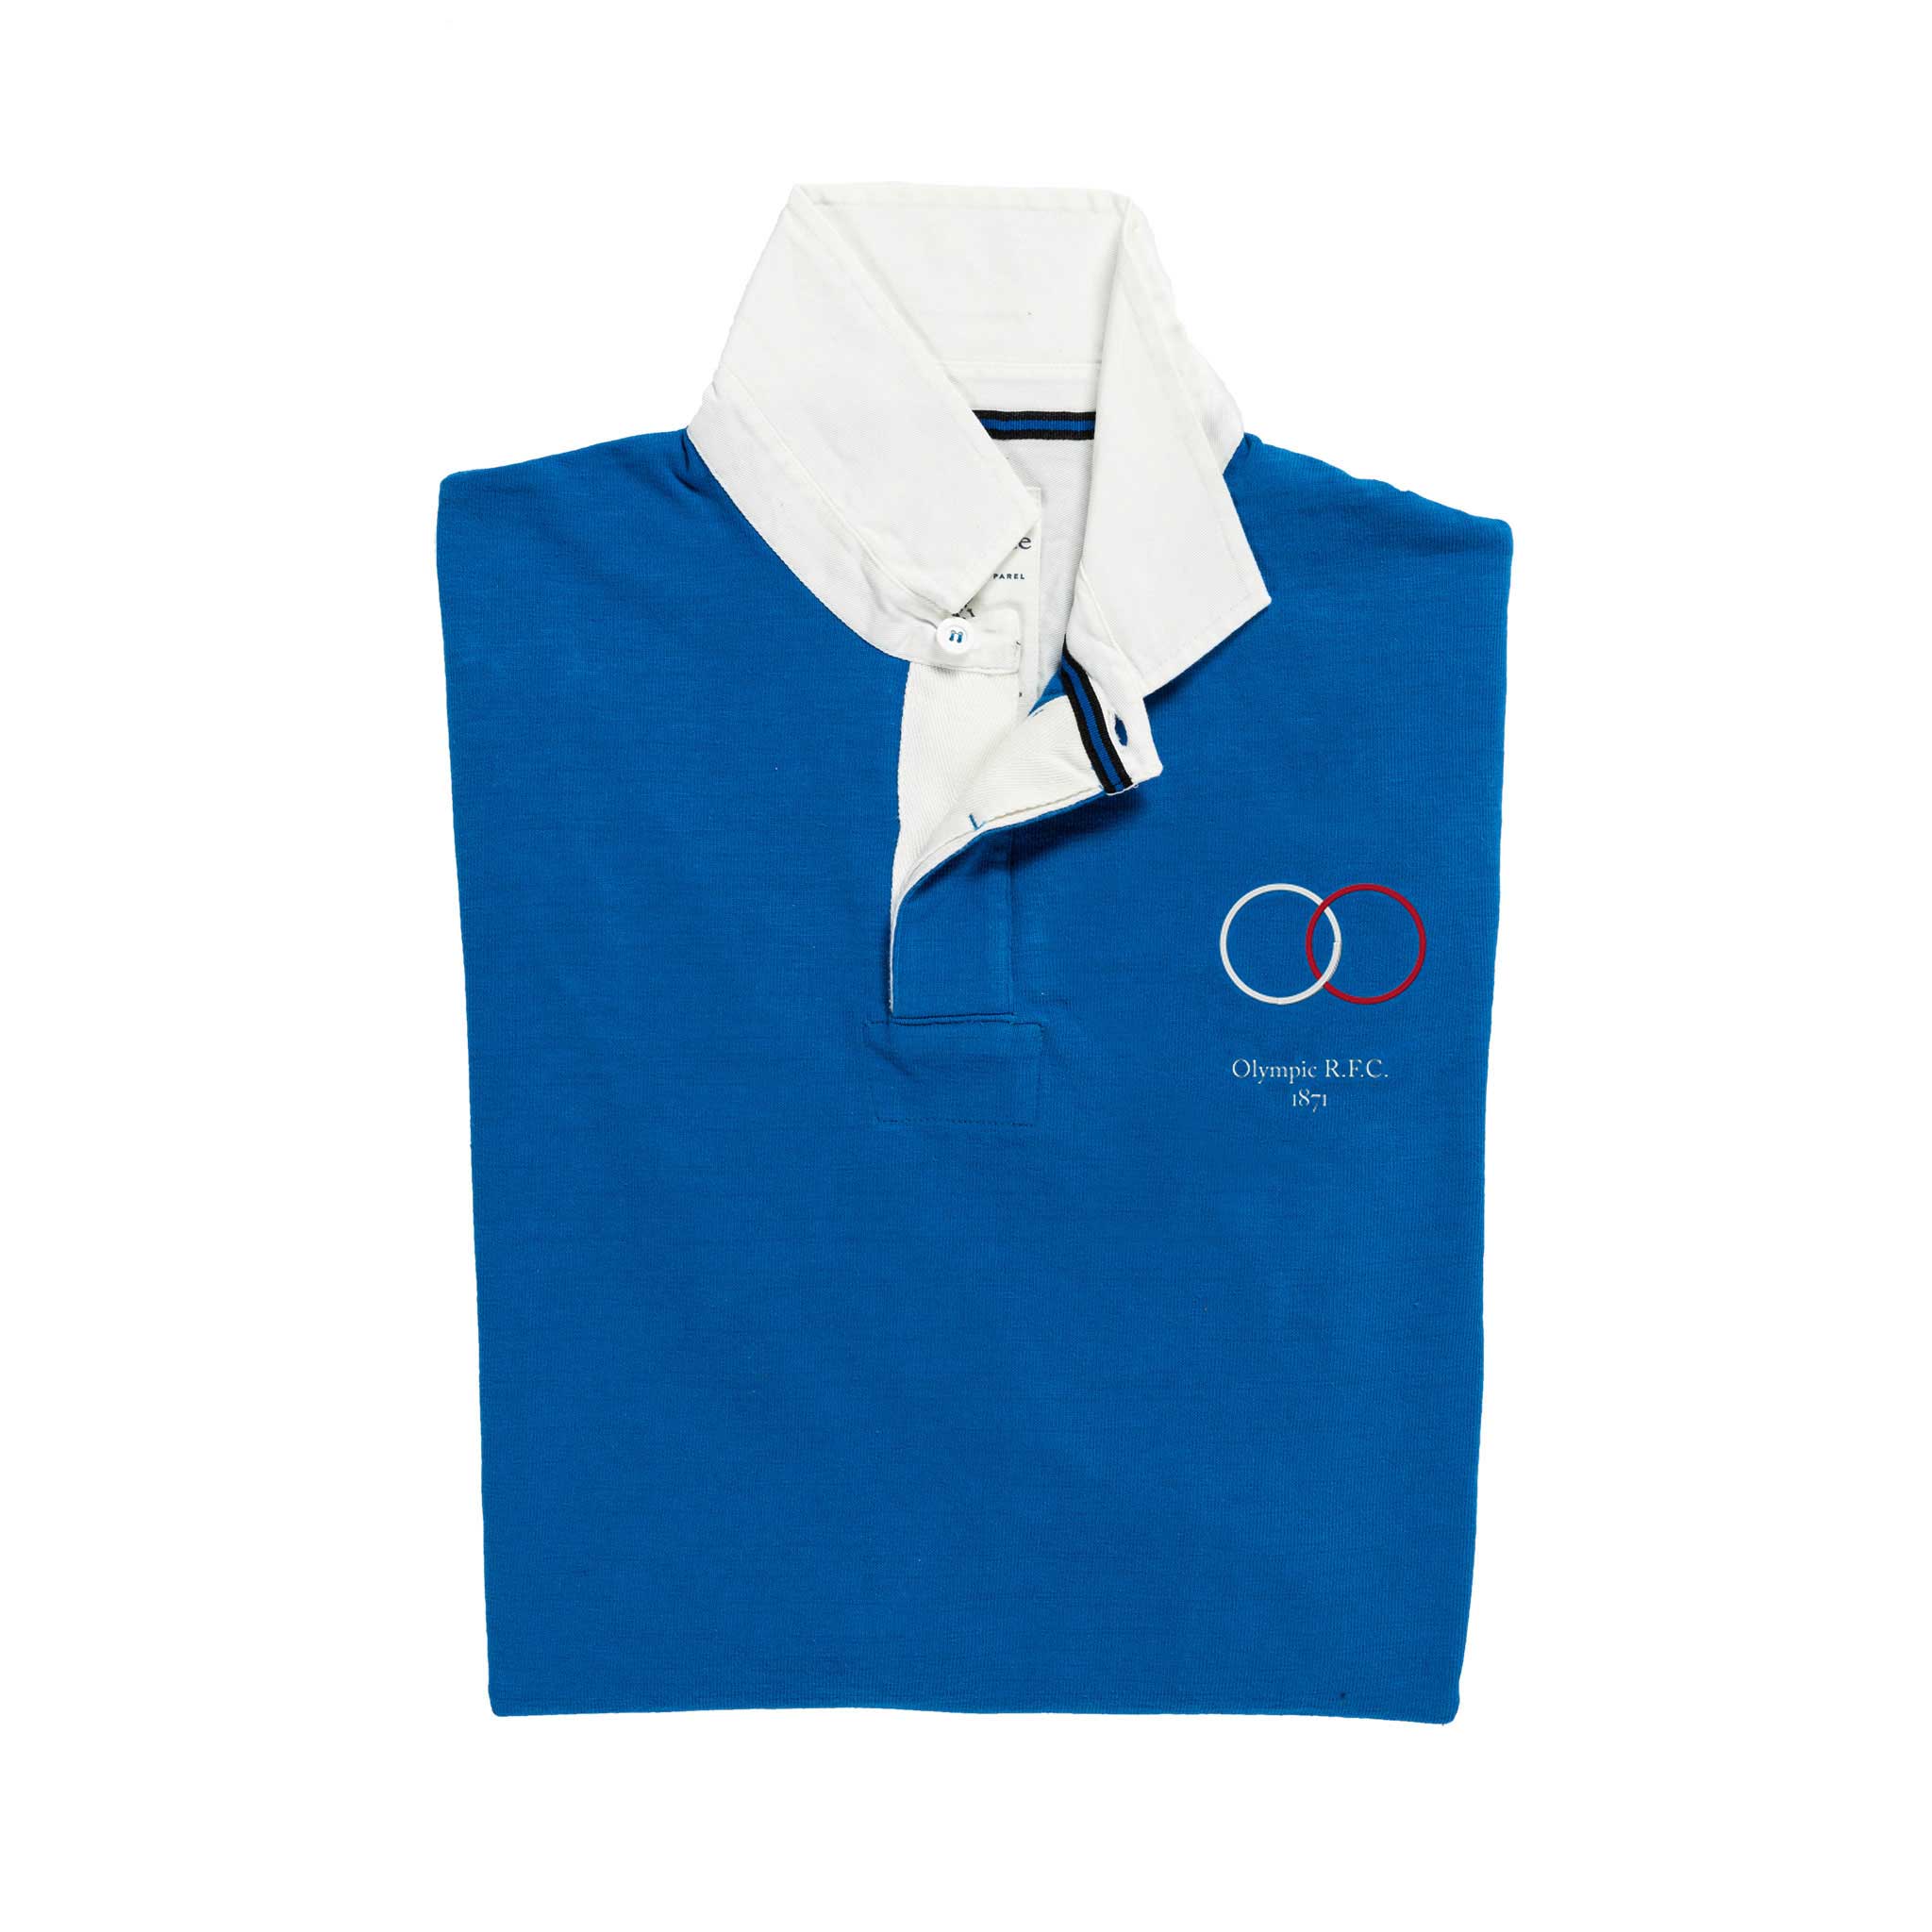 Olympic 1871 Rugby Shirt_Folded